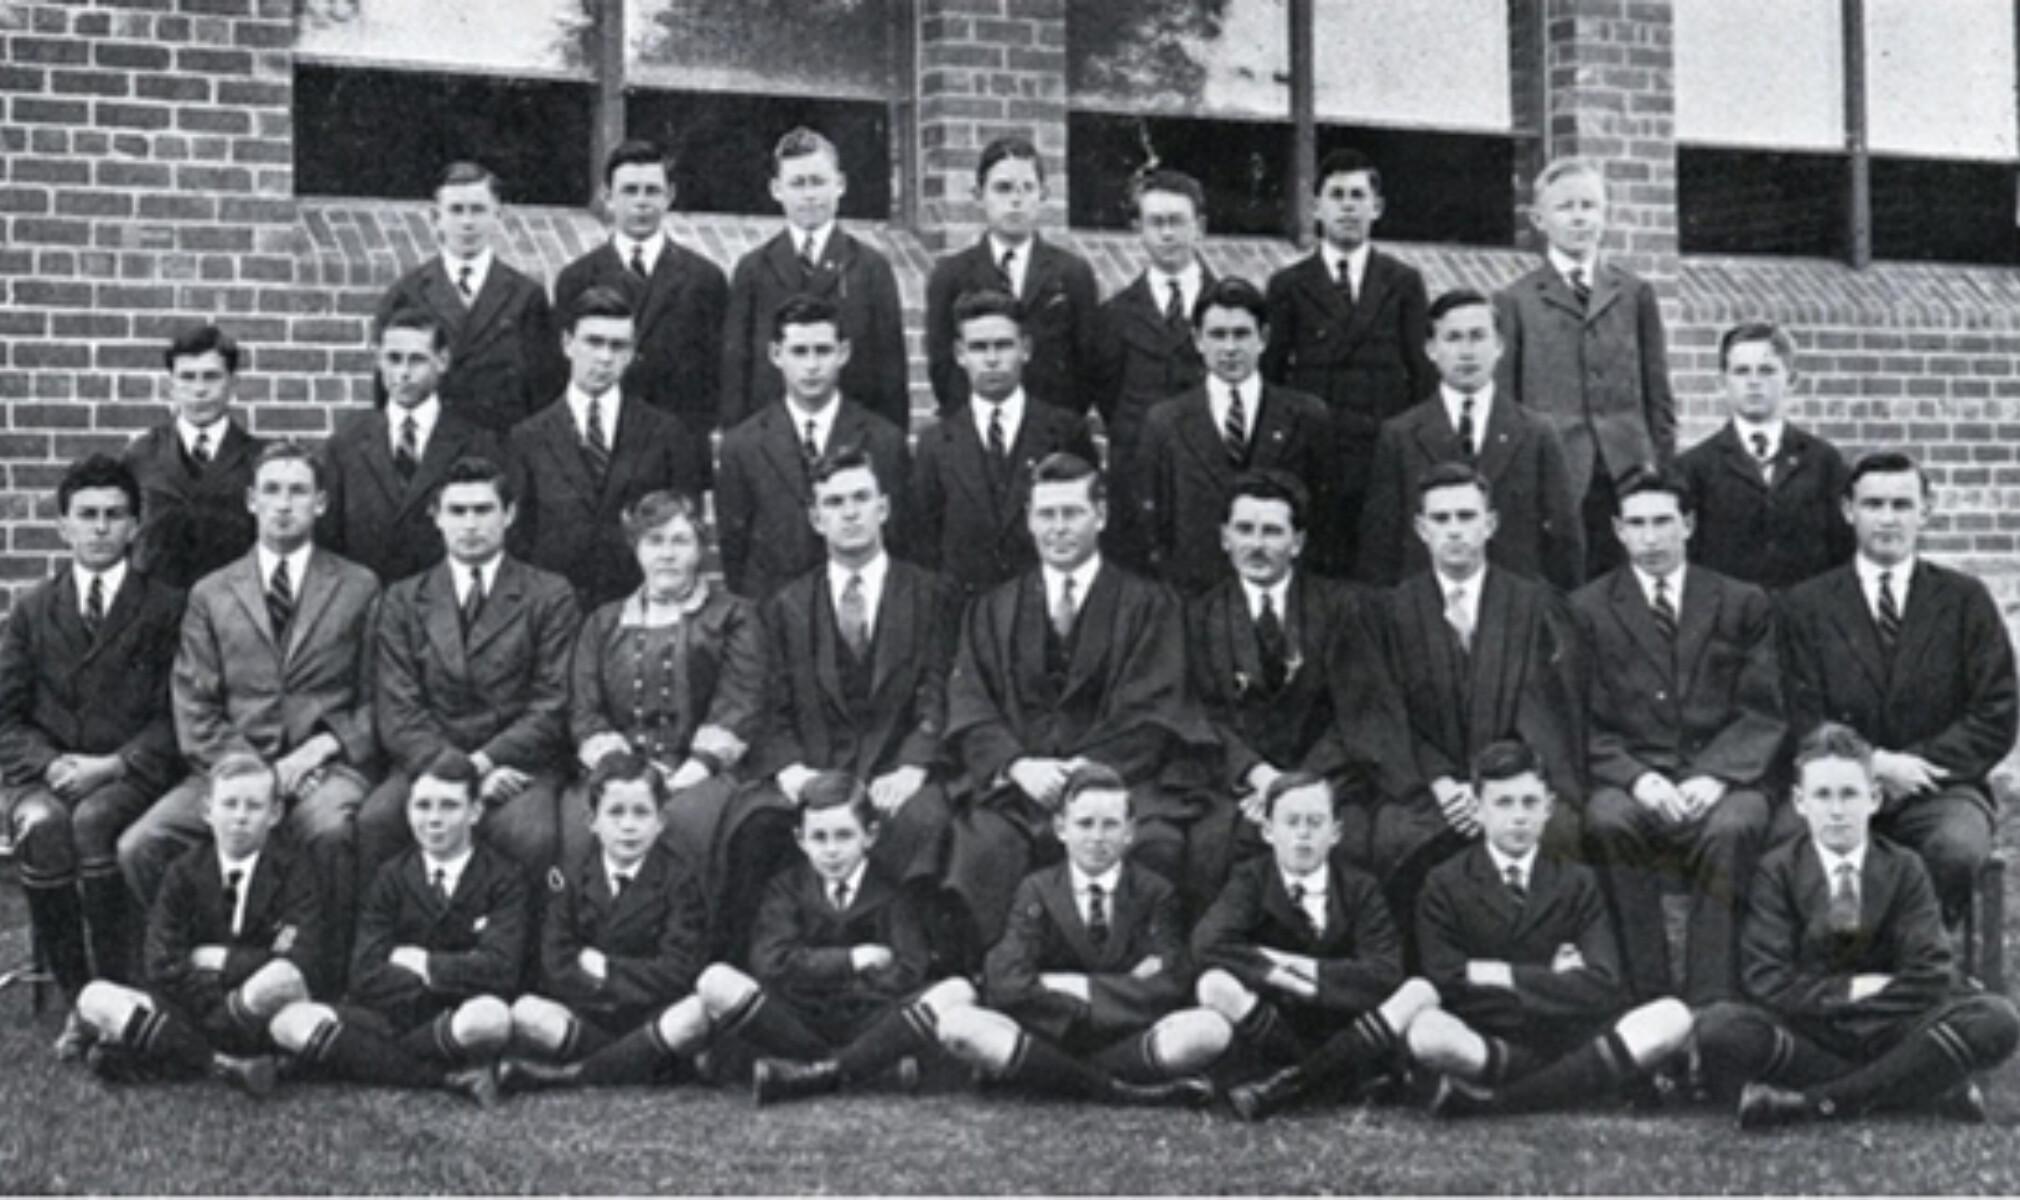 Carey's resident staff and boarders in 1928. Paddy is second row from the back, third from the left.